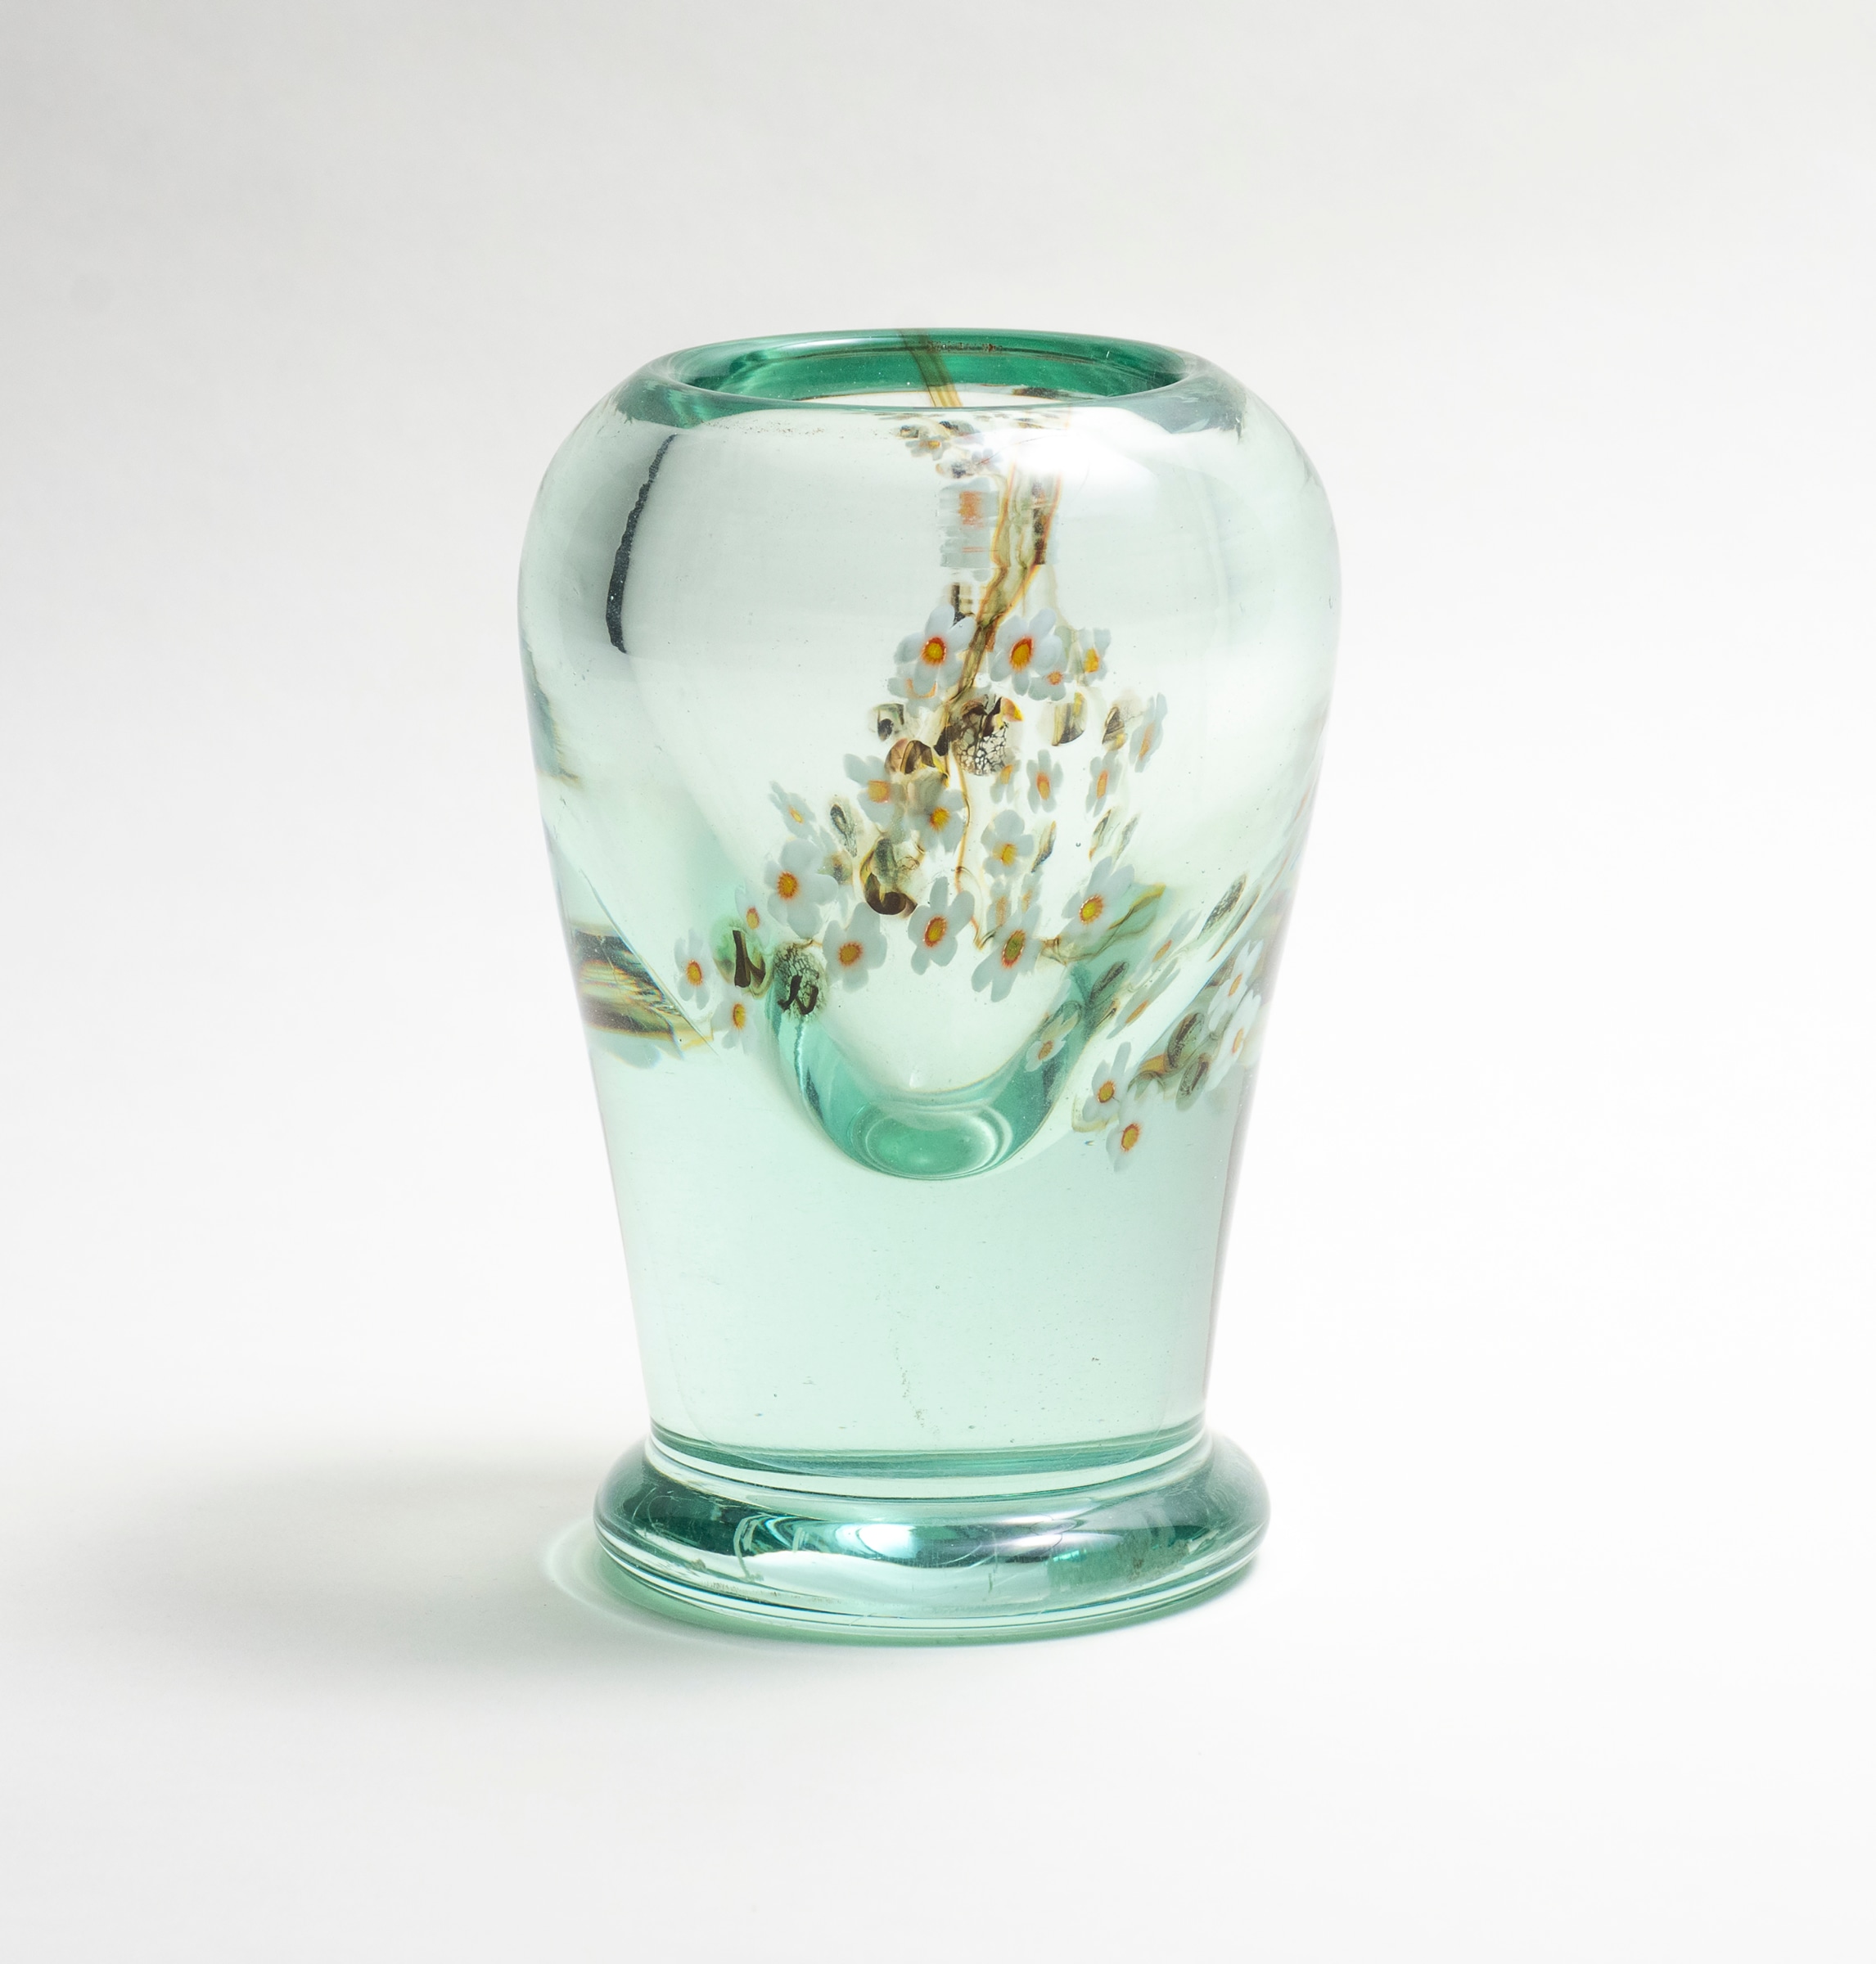 A tiffany favrile glass aquamarine style vase, in which a motif of an apple blossom branch laden with white flowers, all articulated in glass, is encased in a thick layer of clear glass to appear as if floating over a pool of water.